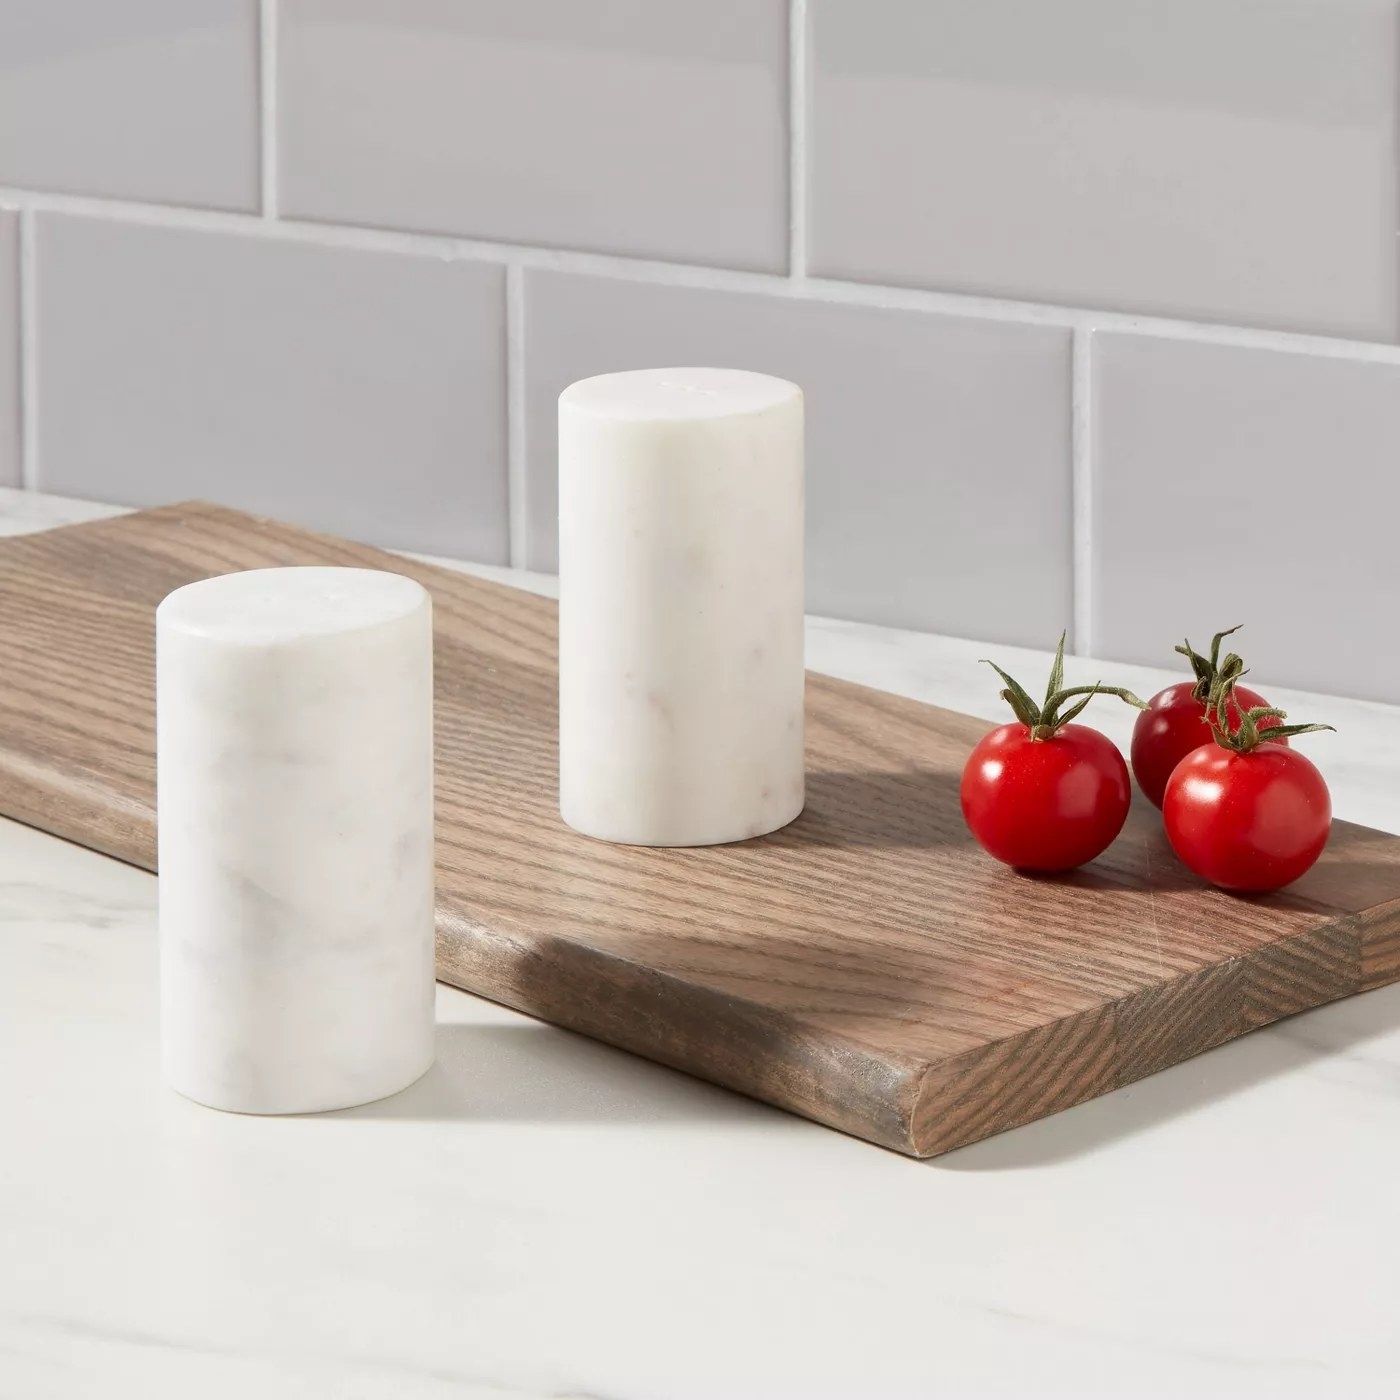 The salt and pepper shaker set in a kitchen